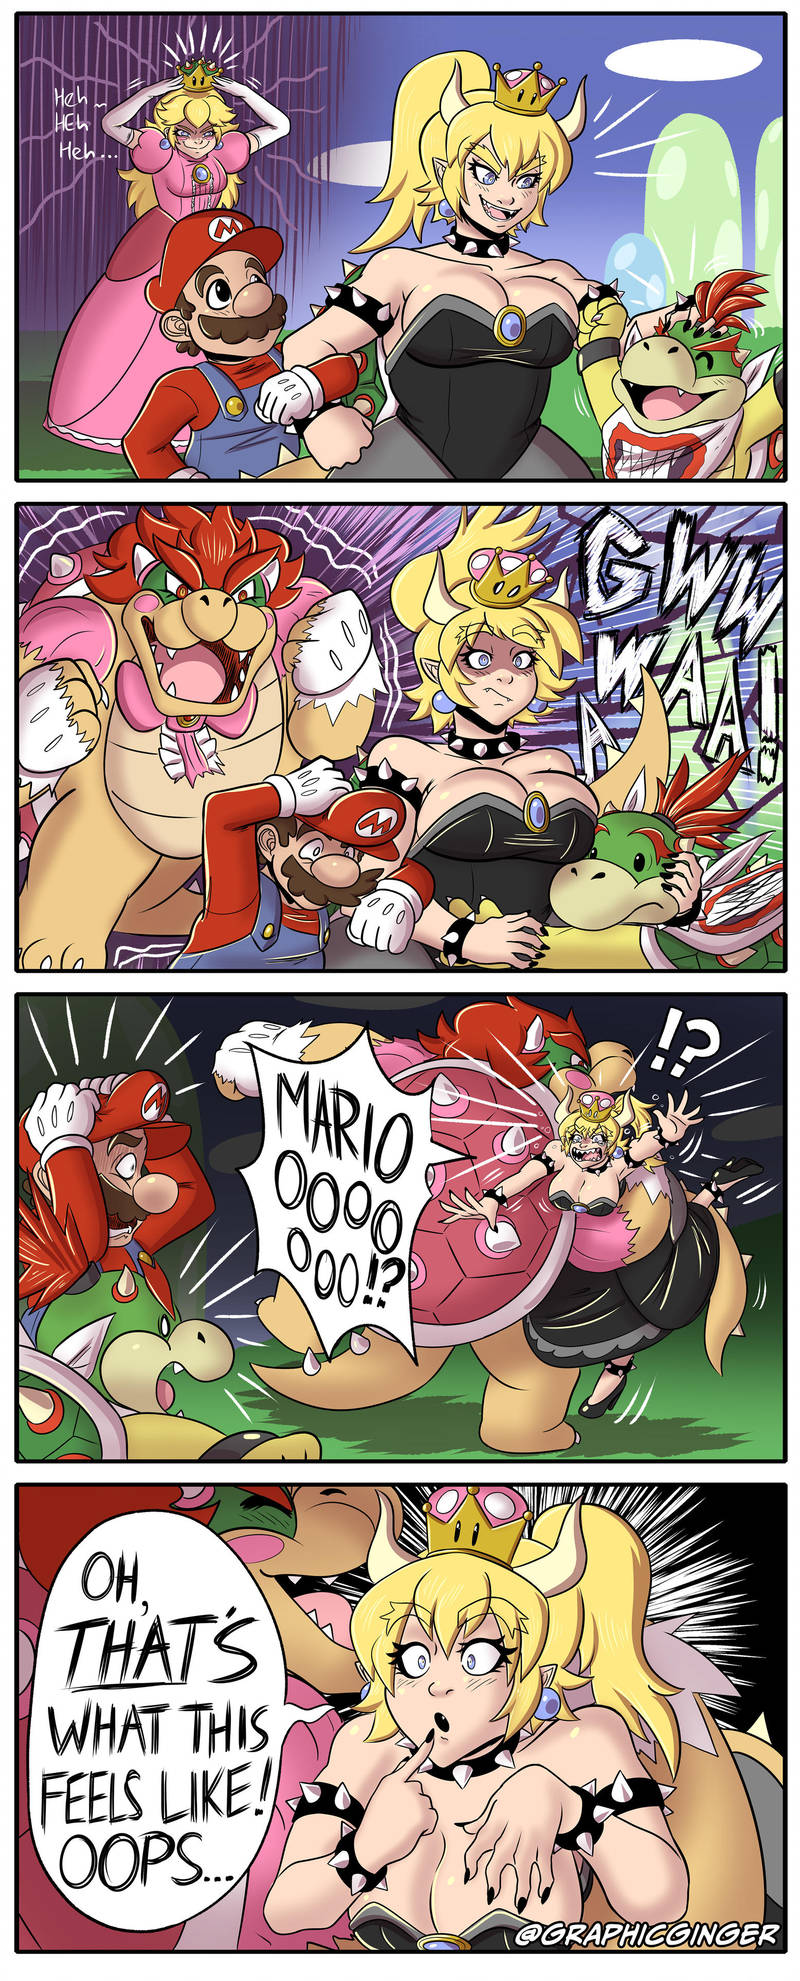 Bowsette Gains the Power-Up of Understanding